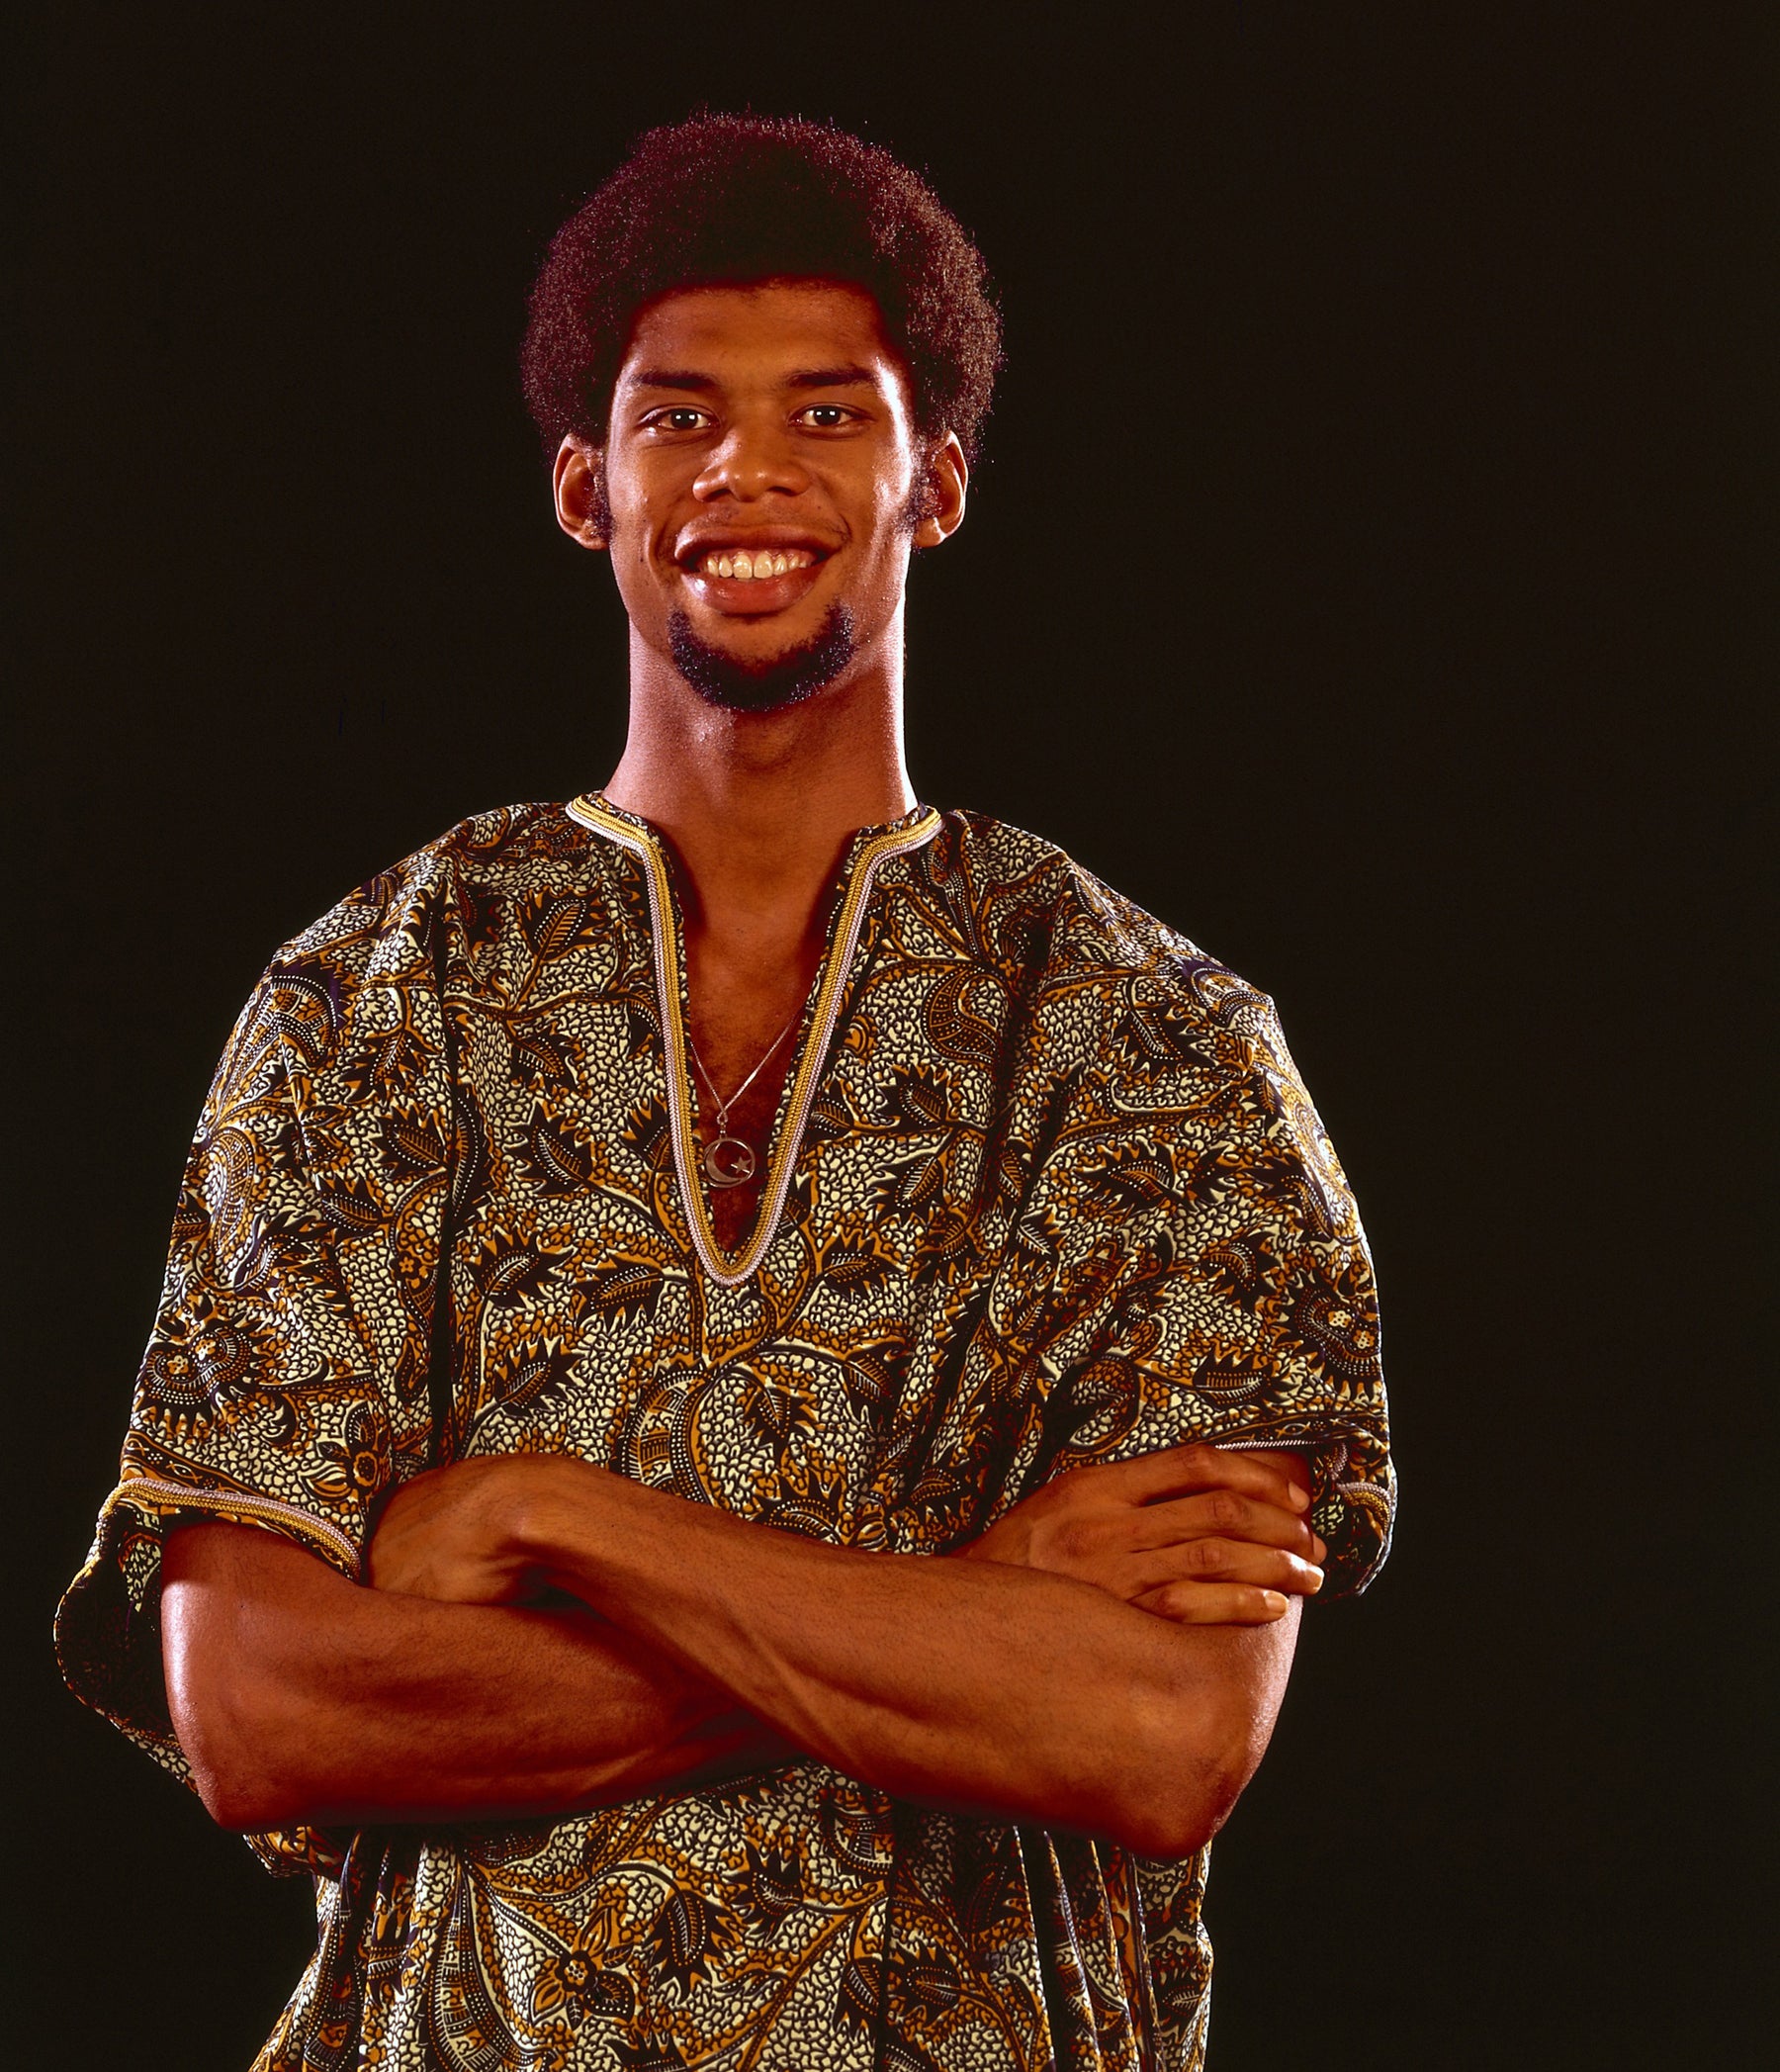 Neil Leifer on X: Multiple exposure portrait of Milwaukee Bucks' Lew  Alcindor, later known as Kareem Abdul-Jabbar, during a photo shoot.  Alcindor is shown wearing his UCLA college jersey and his Power